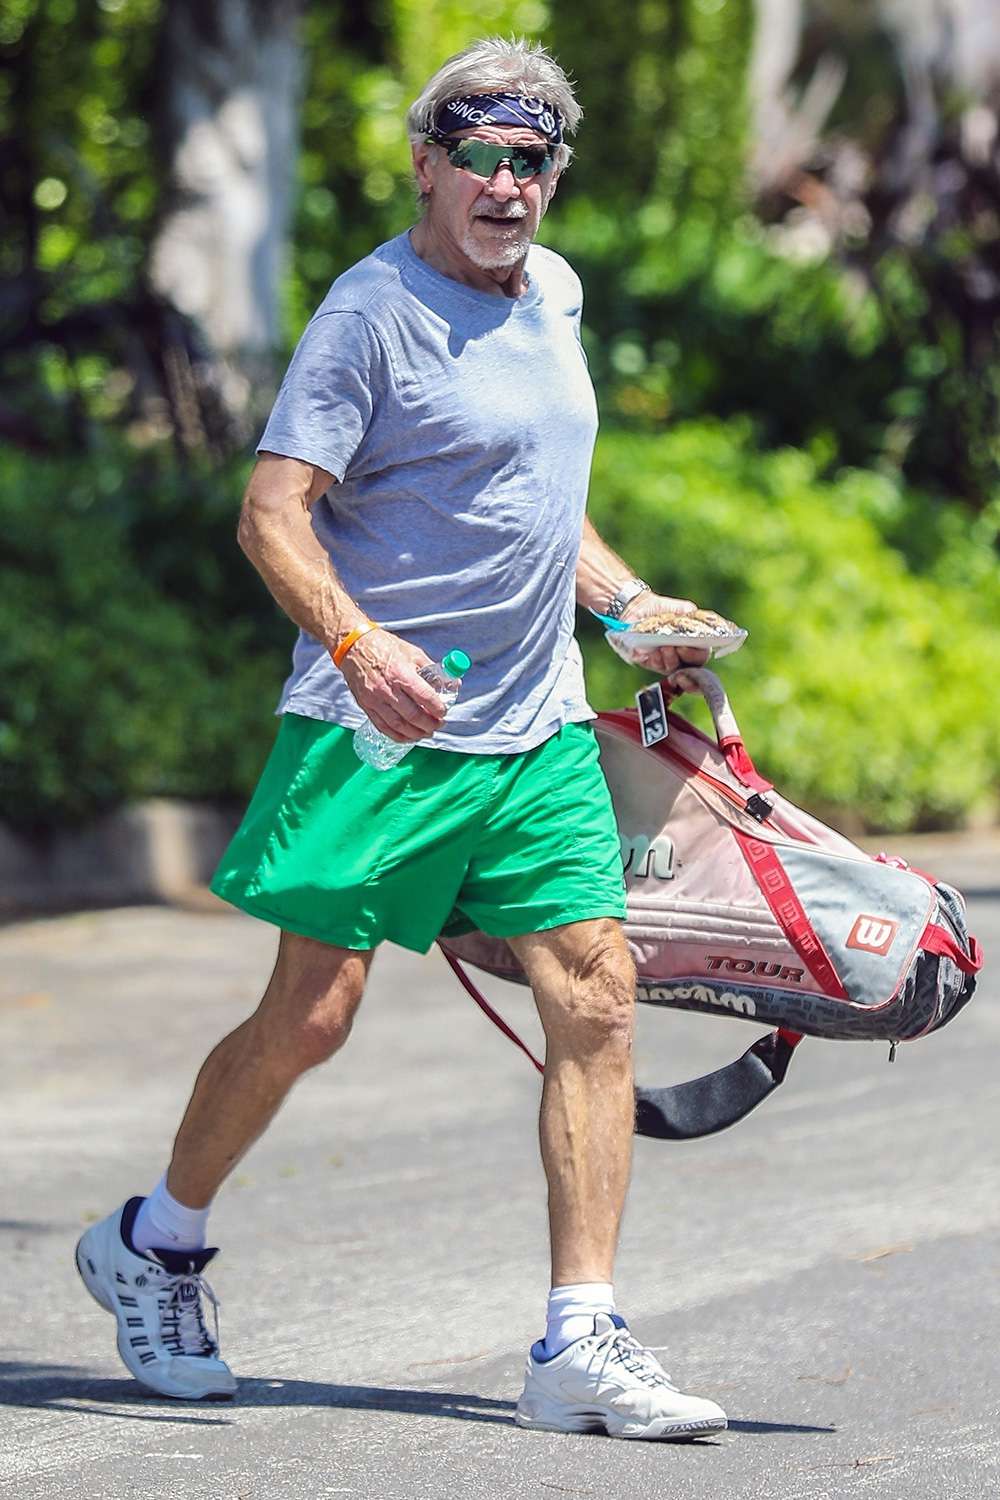 Harrison Ford heads out to a tennis match